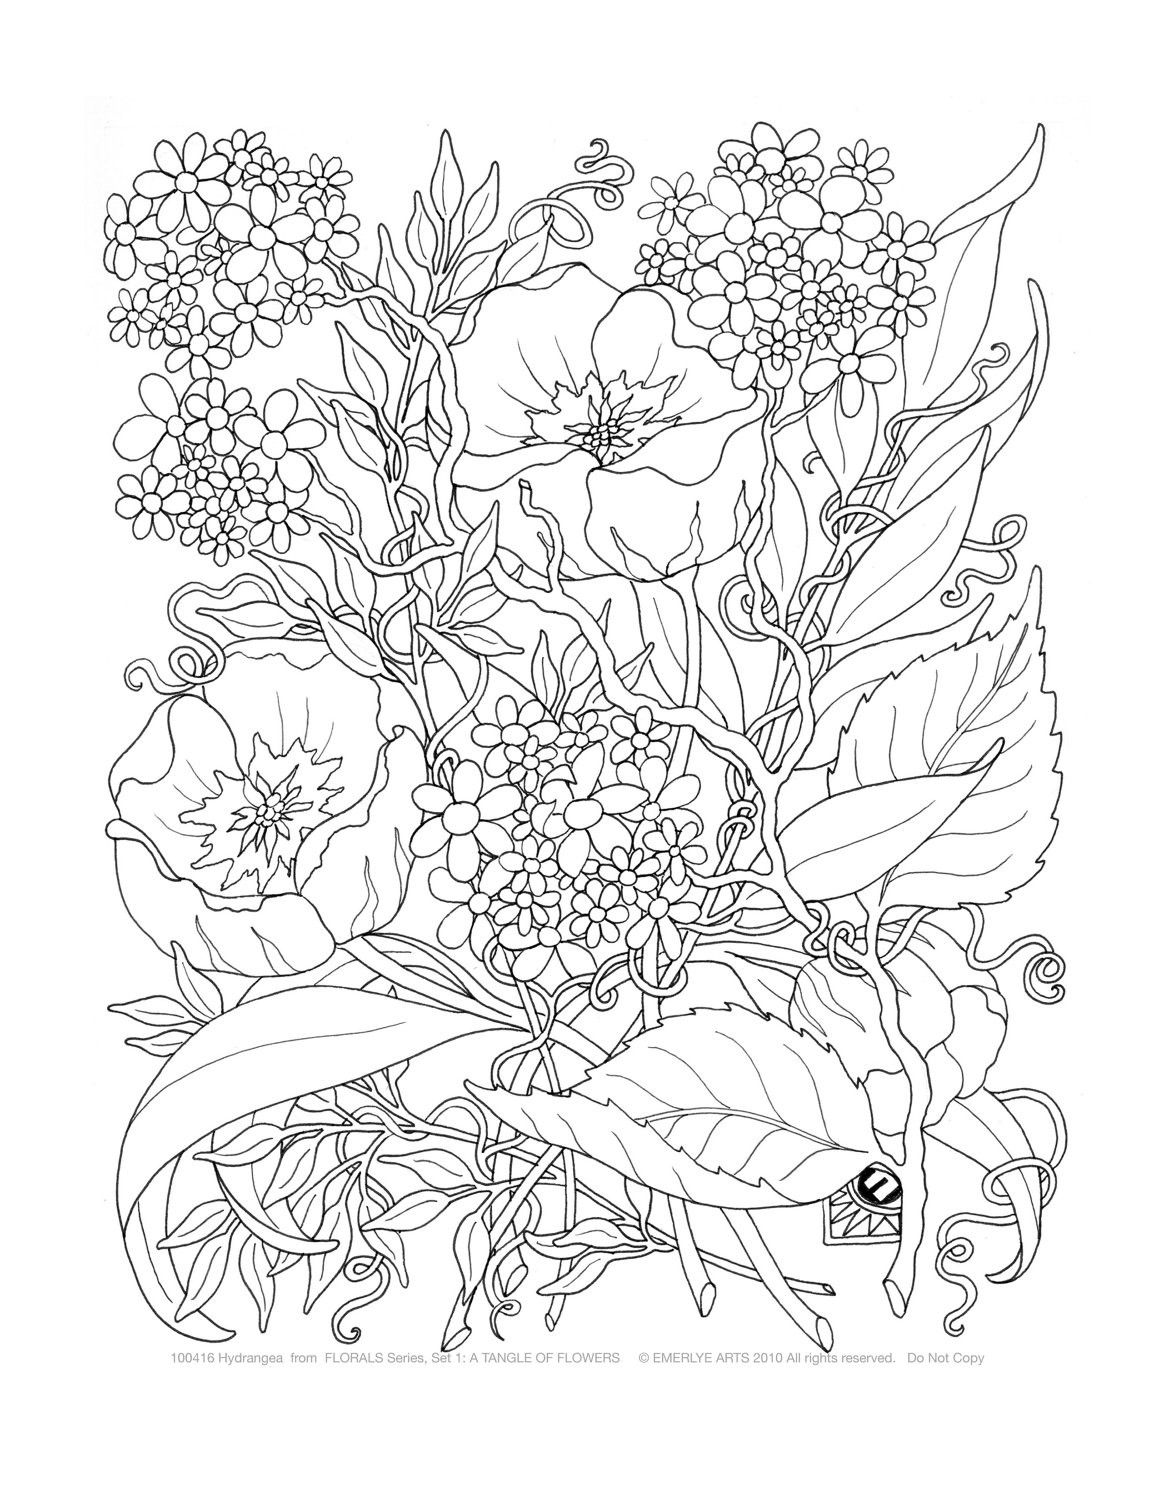 Floral Coloring Books For Adults
 Adult Coloring A Tangle of Flowers Set of 8 by emerlyearts